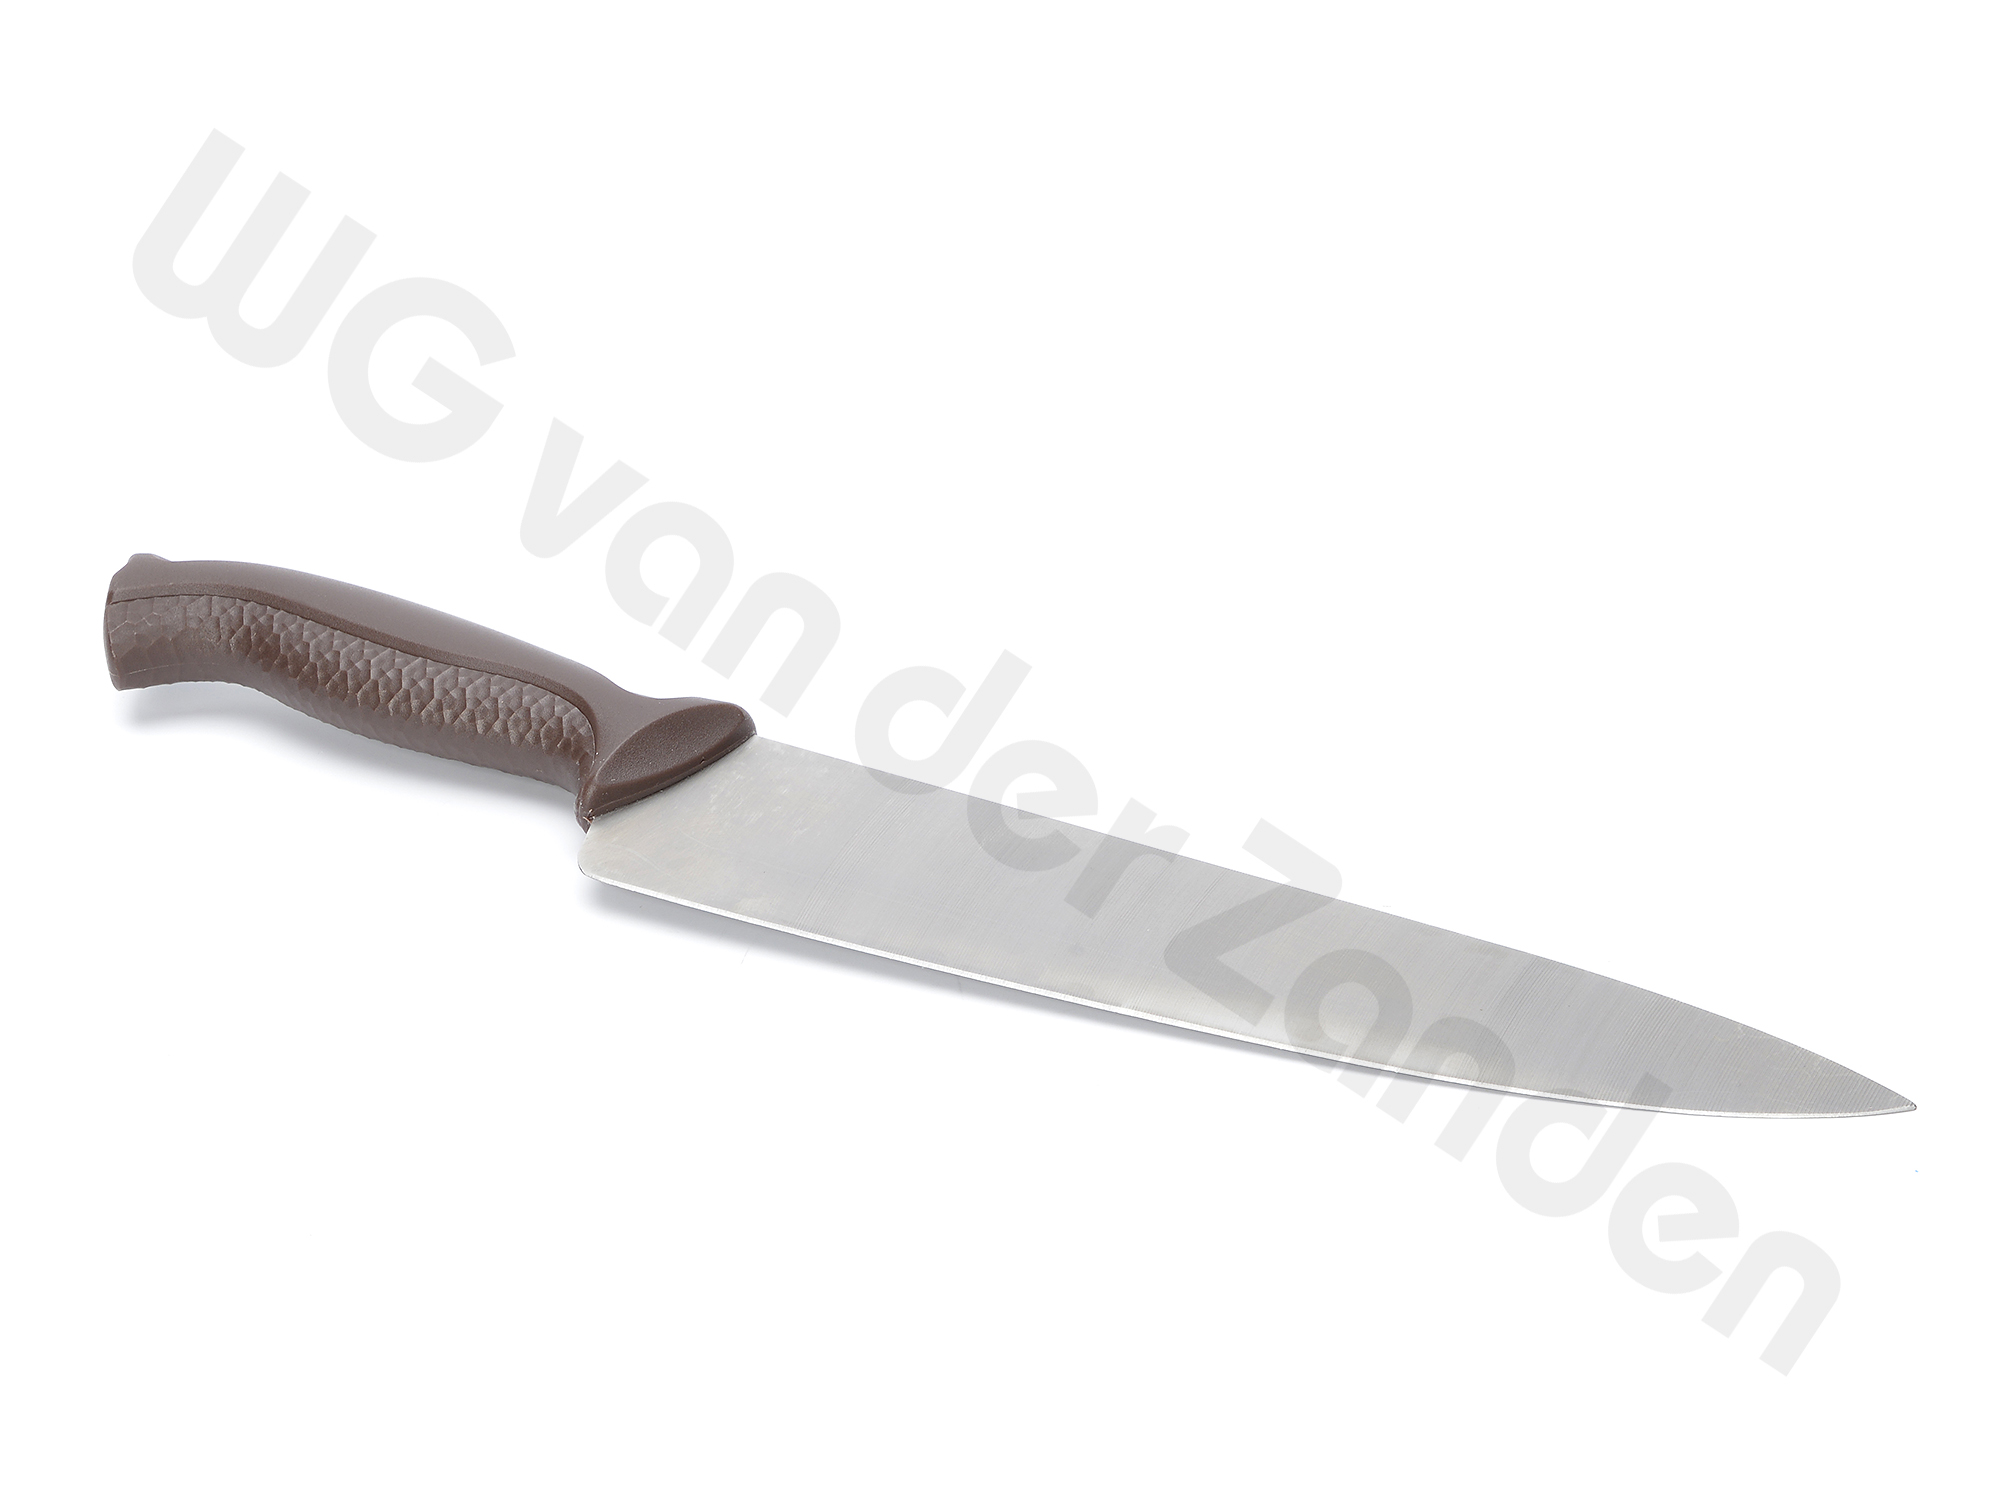 551531 CHEFS KNIFE 25CM BROWN HANDLE